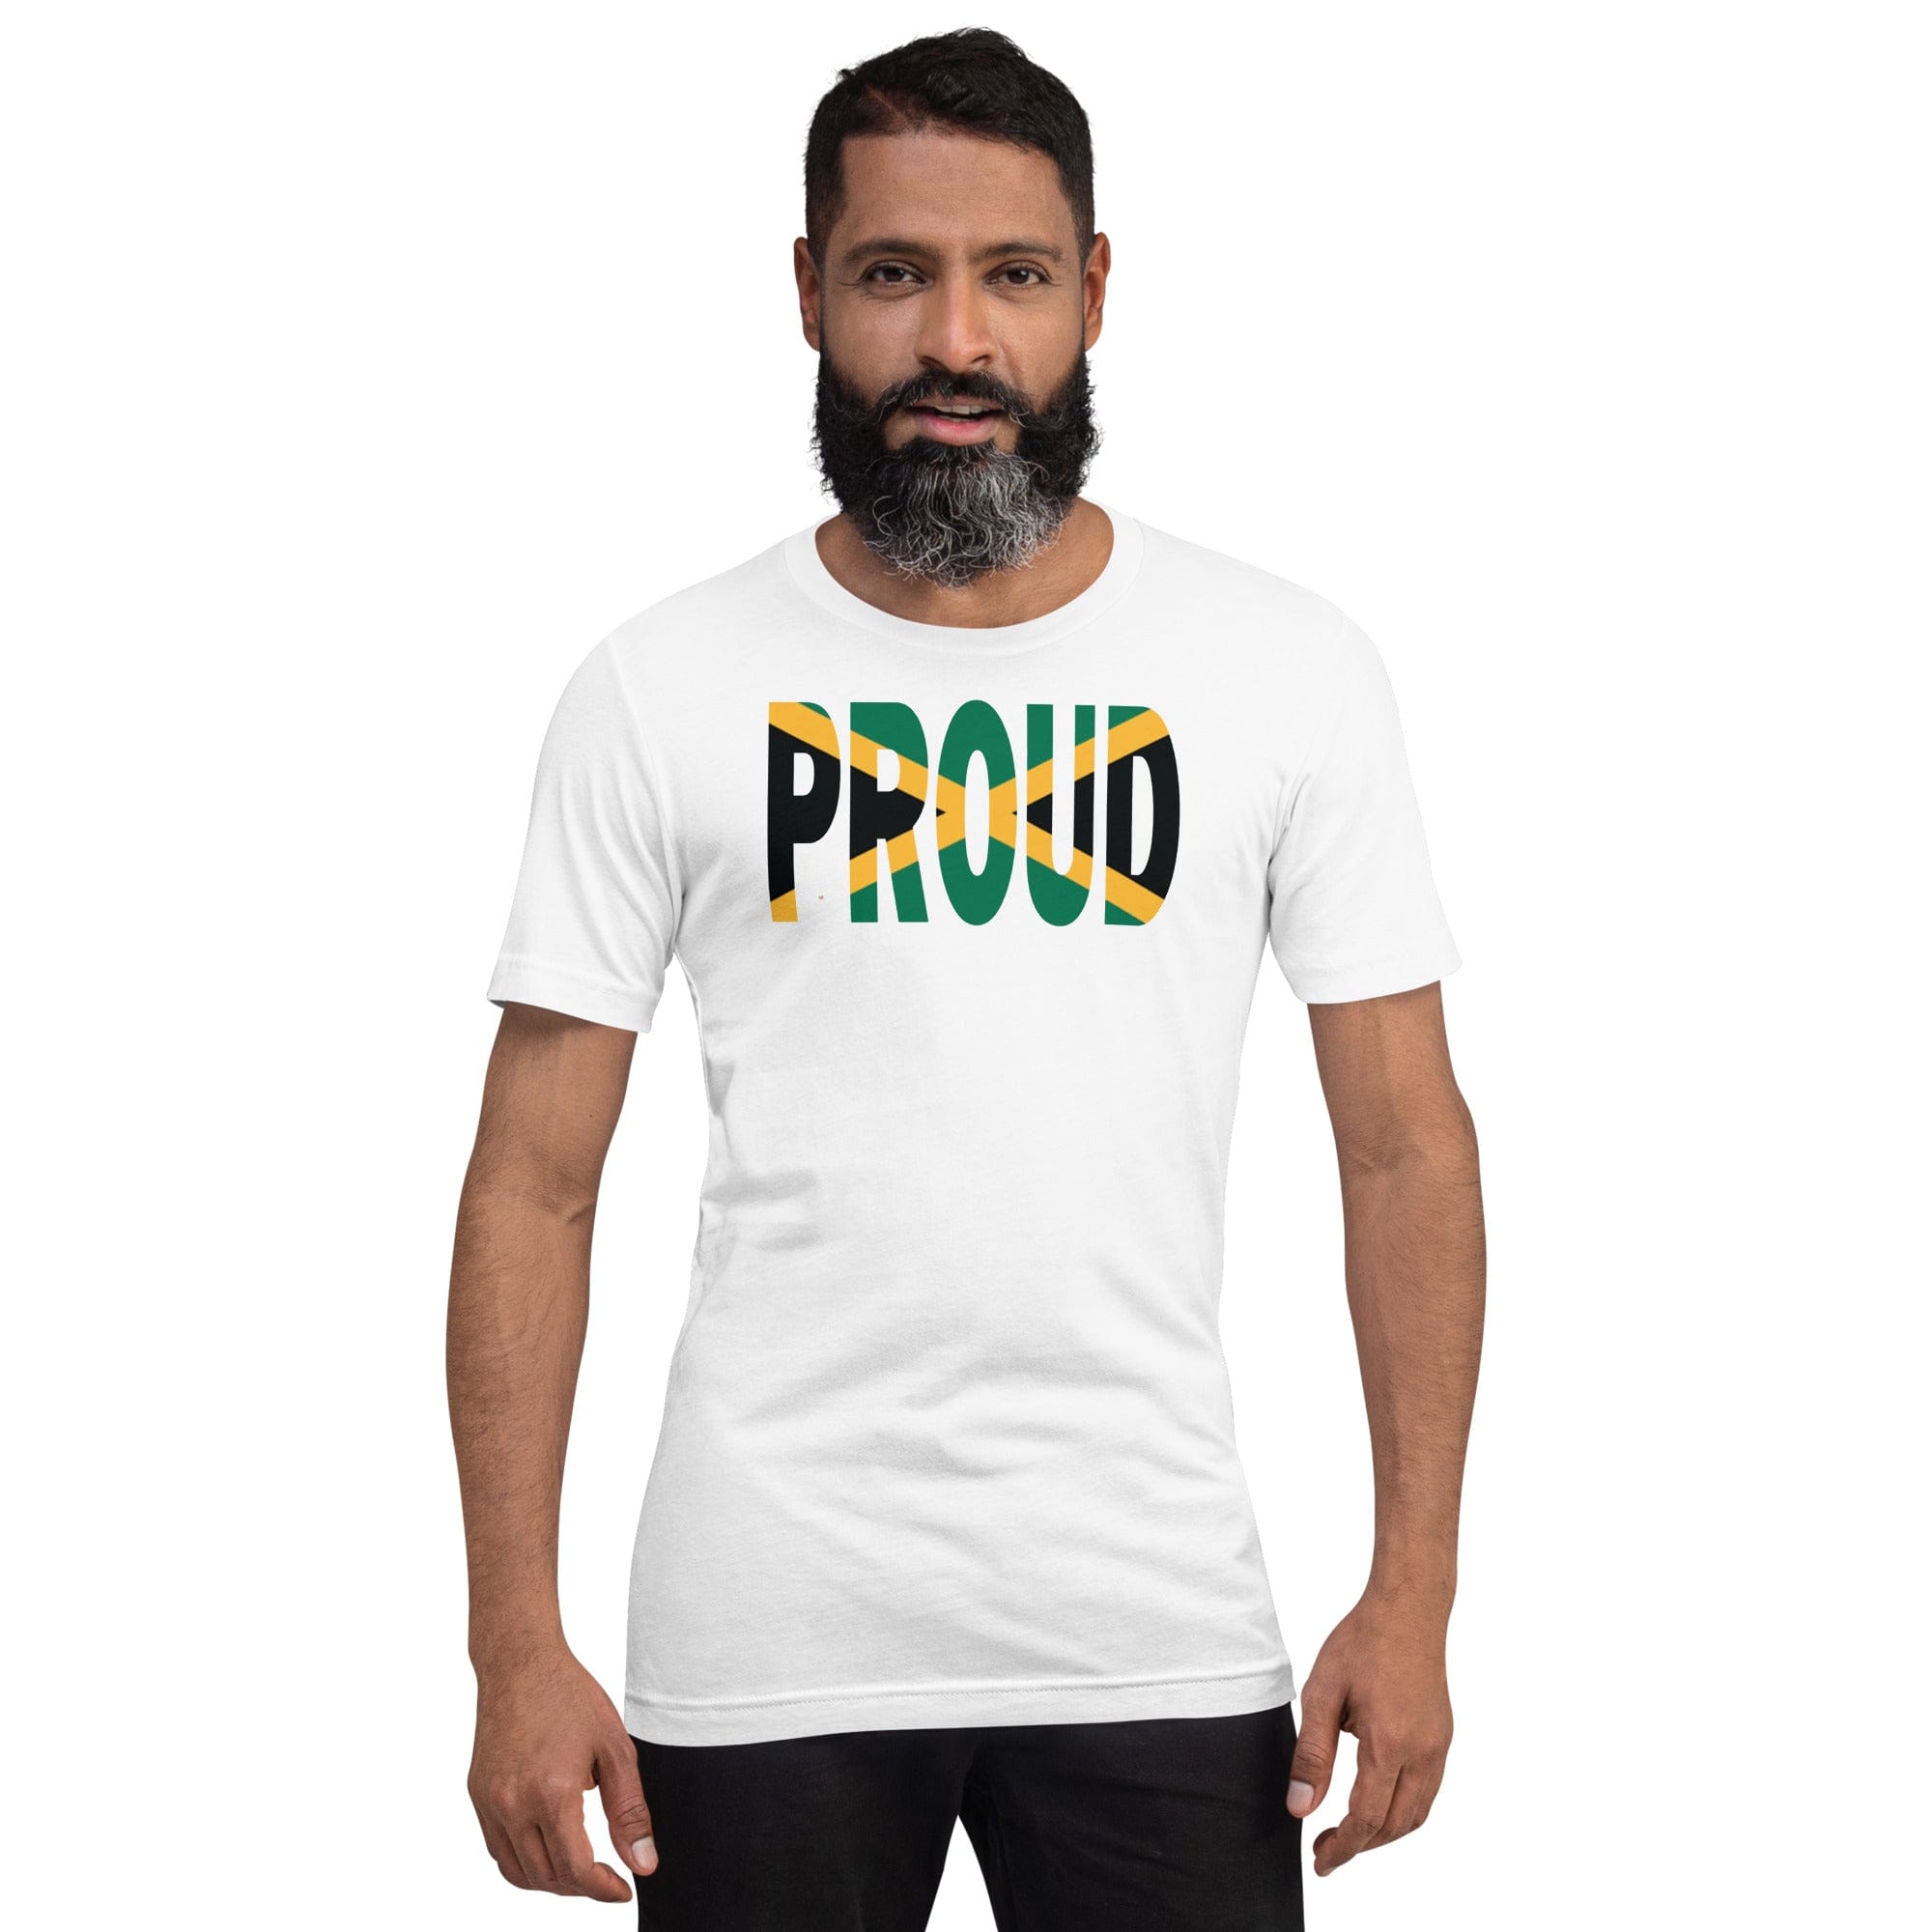 Jamaica Flag designed to spell Proud on a white color t-shirt worn by a black man.